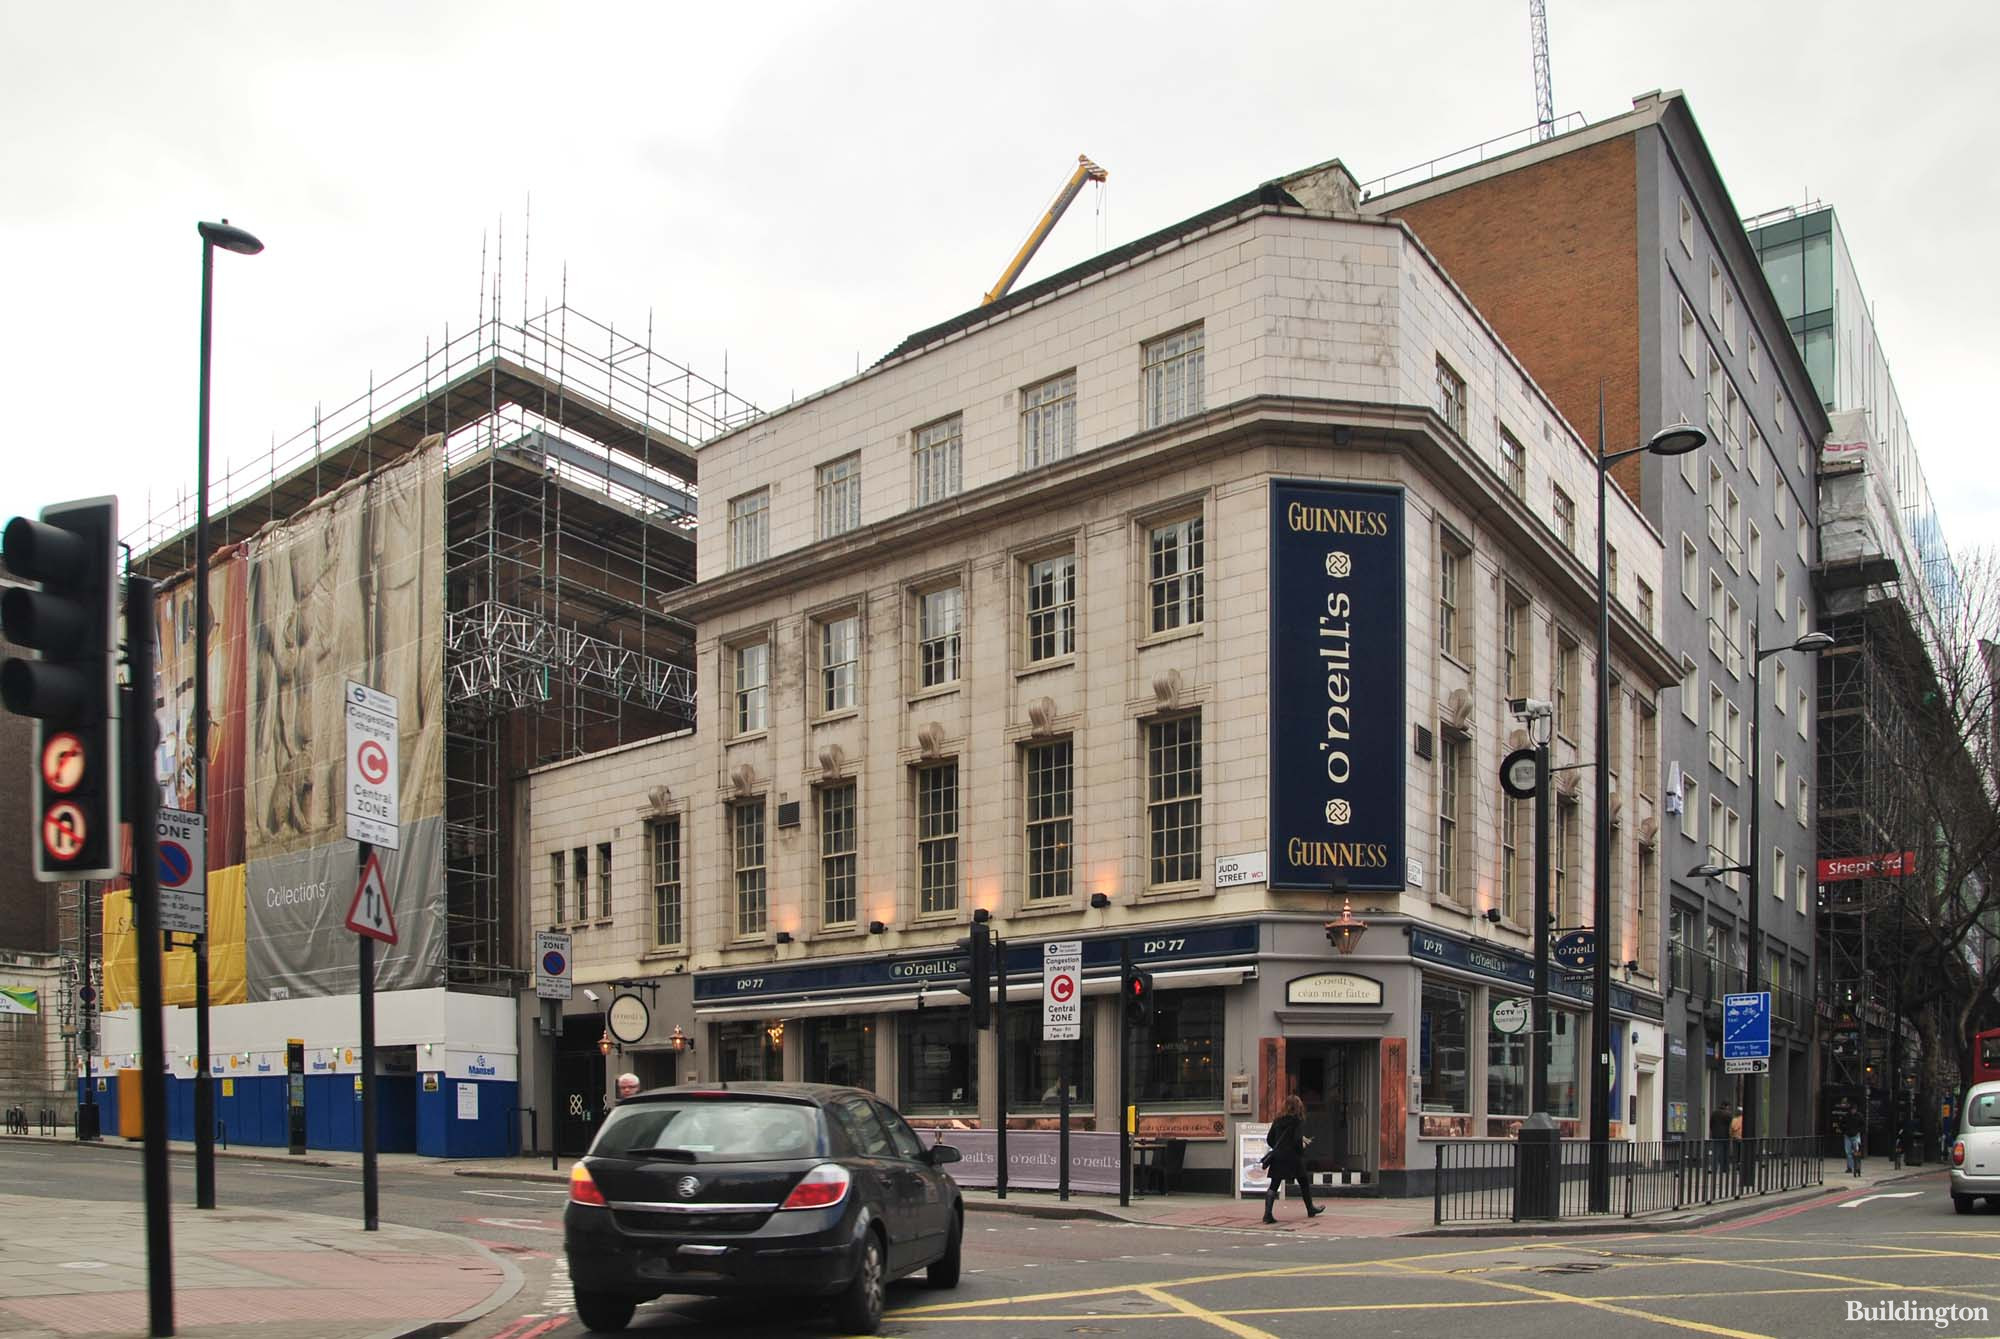 O'Neill's Guinness pub at 73-77 Euston Road on the corner of Judd Street; John Dodson House is being refurbished next door.